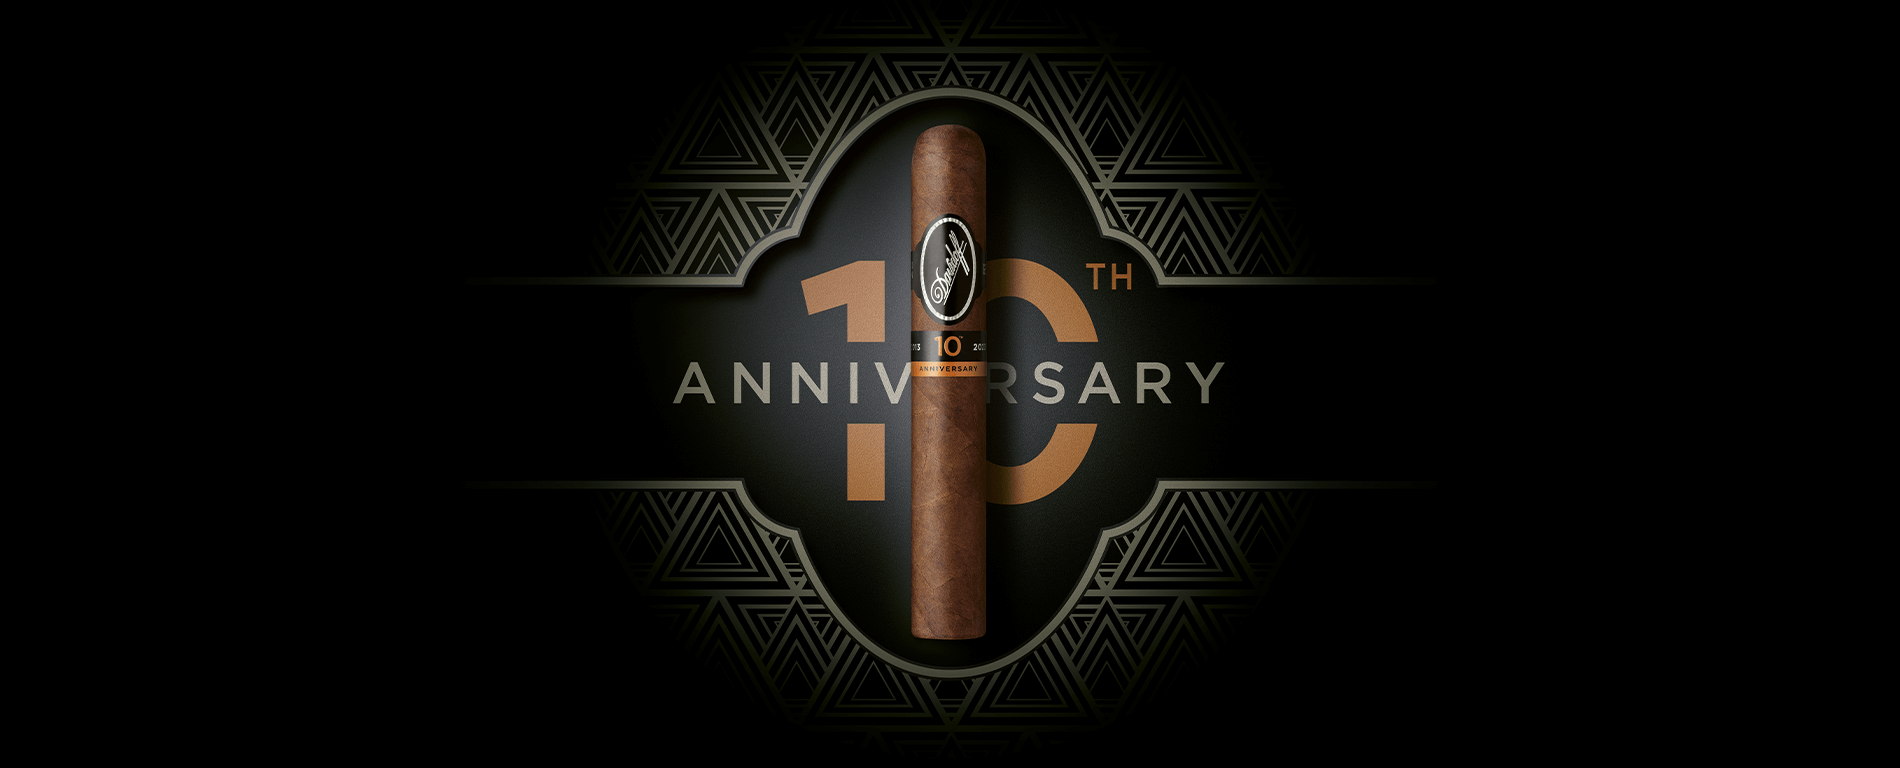 The Davidoff Nicaragua 10th Anniversary Limited Edition gran toro cigar placed in front of its logo. 